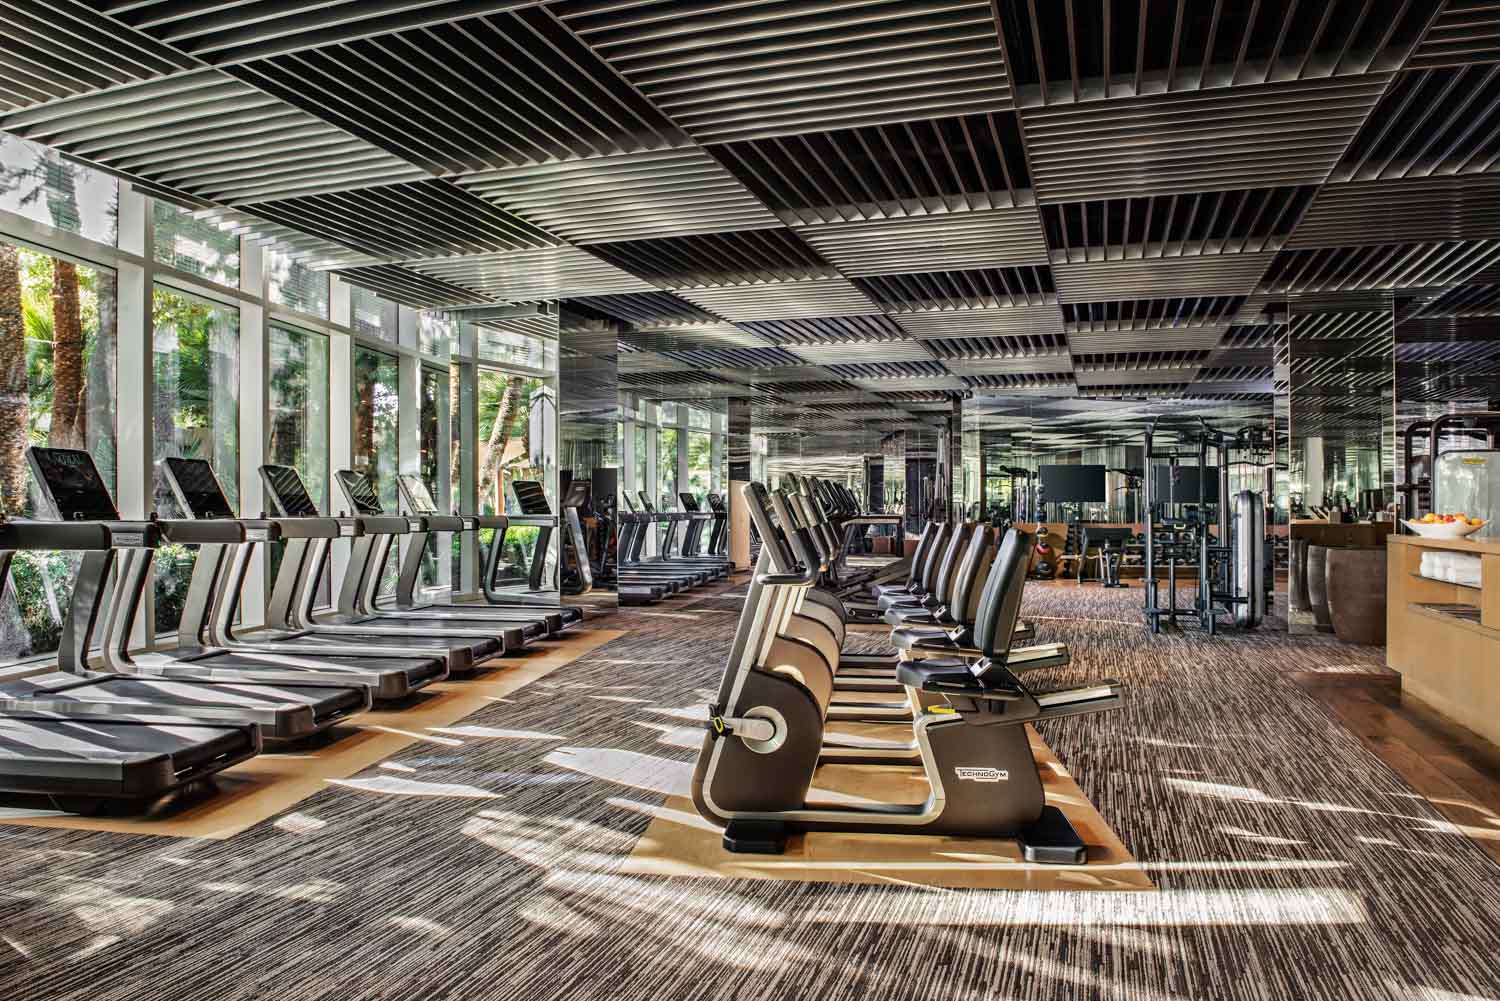 The gym at ARIA conducts classes and houses state-of-the-art Technogym equipment 